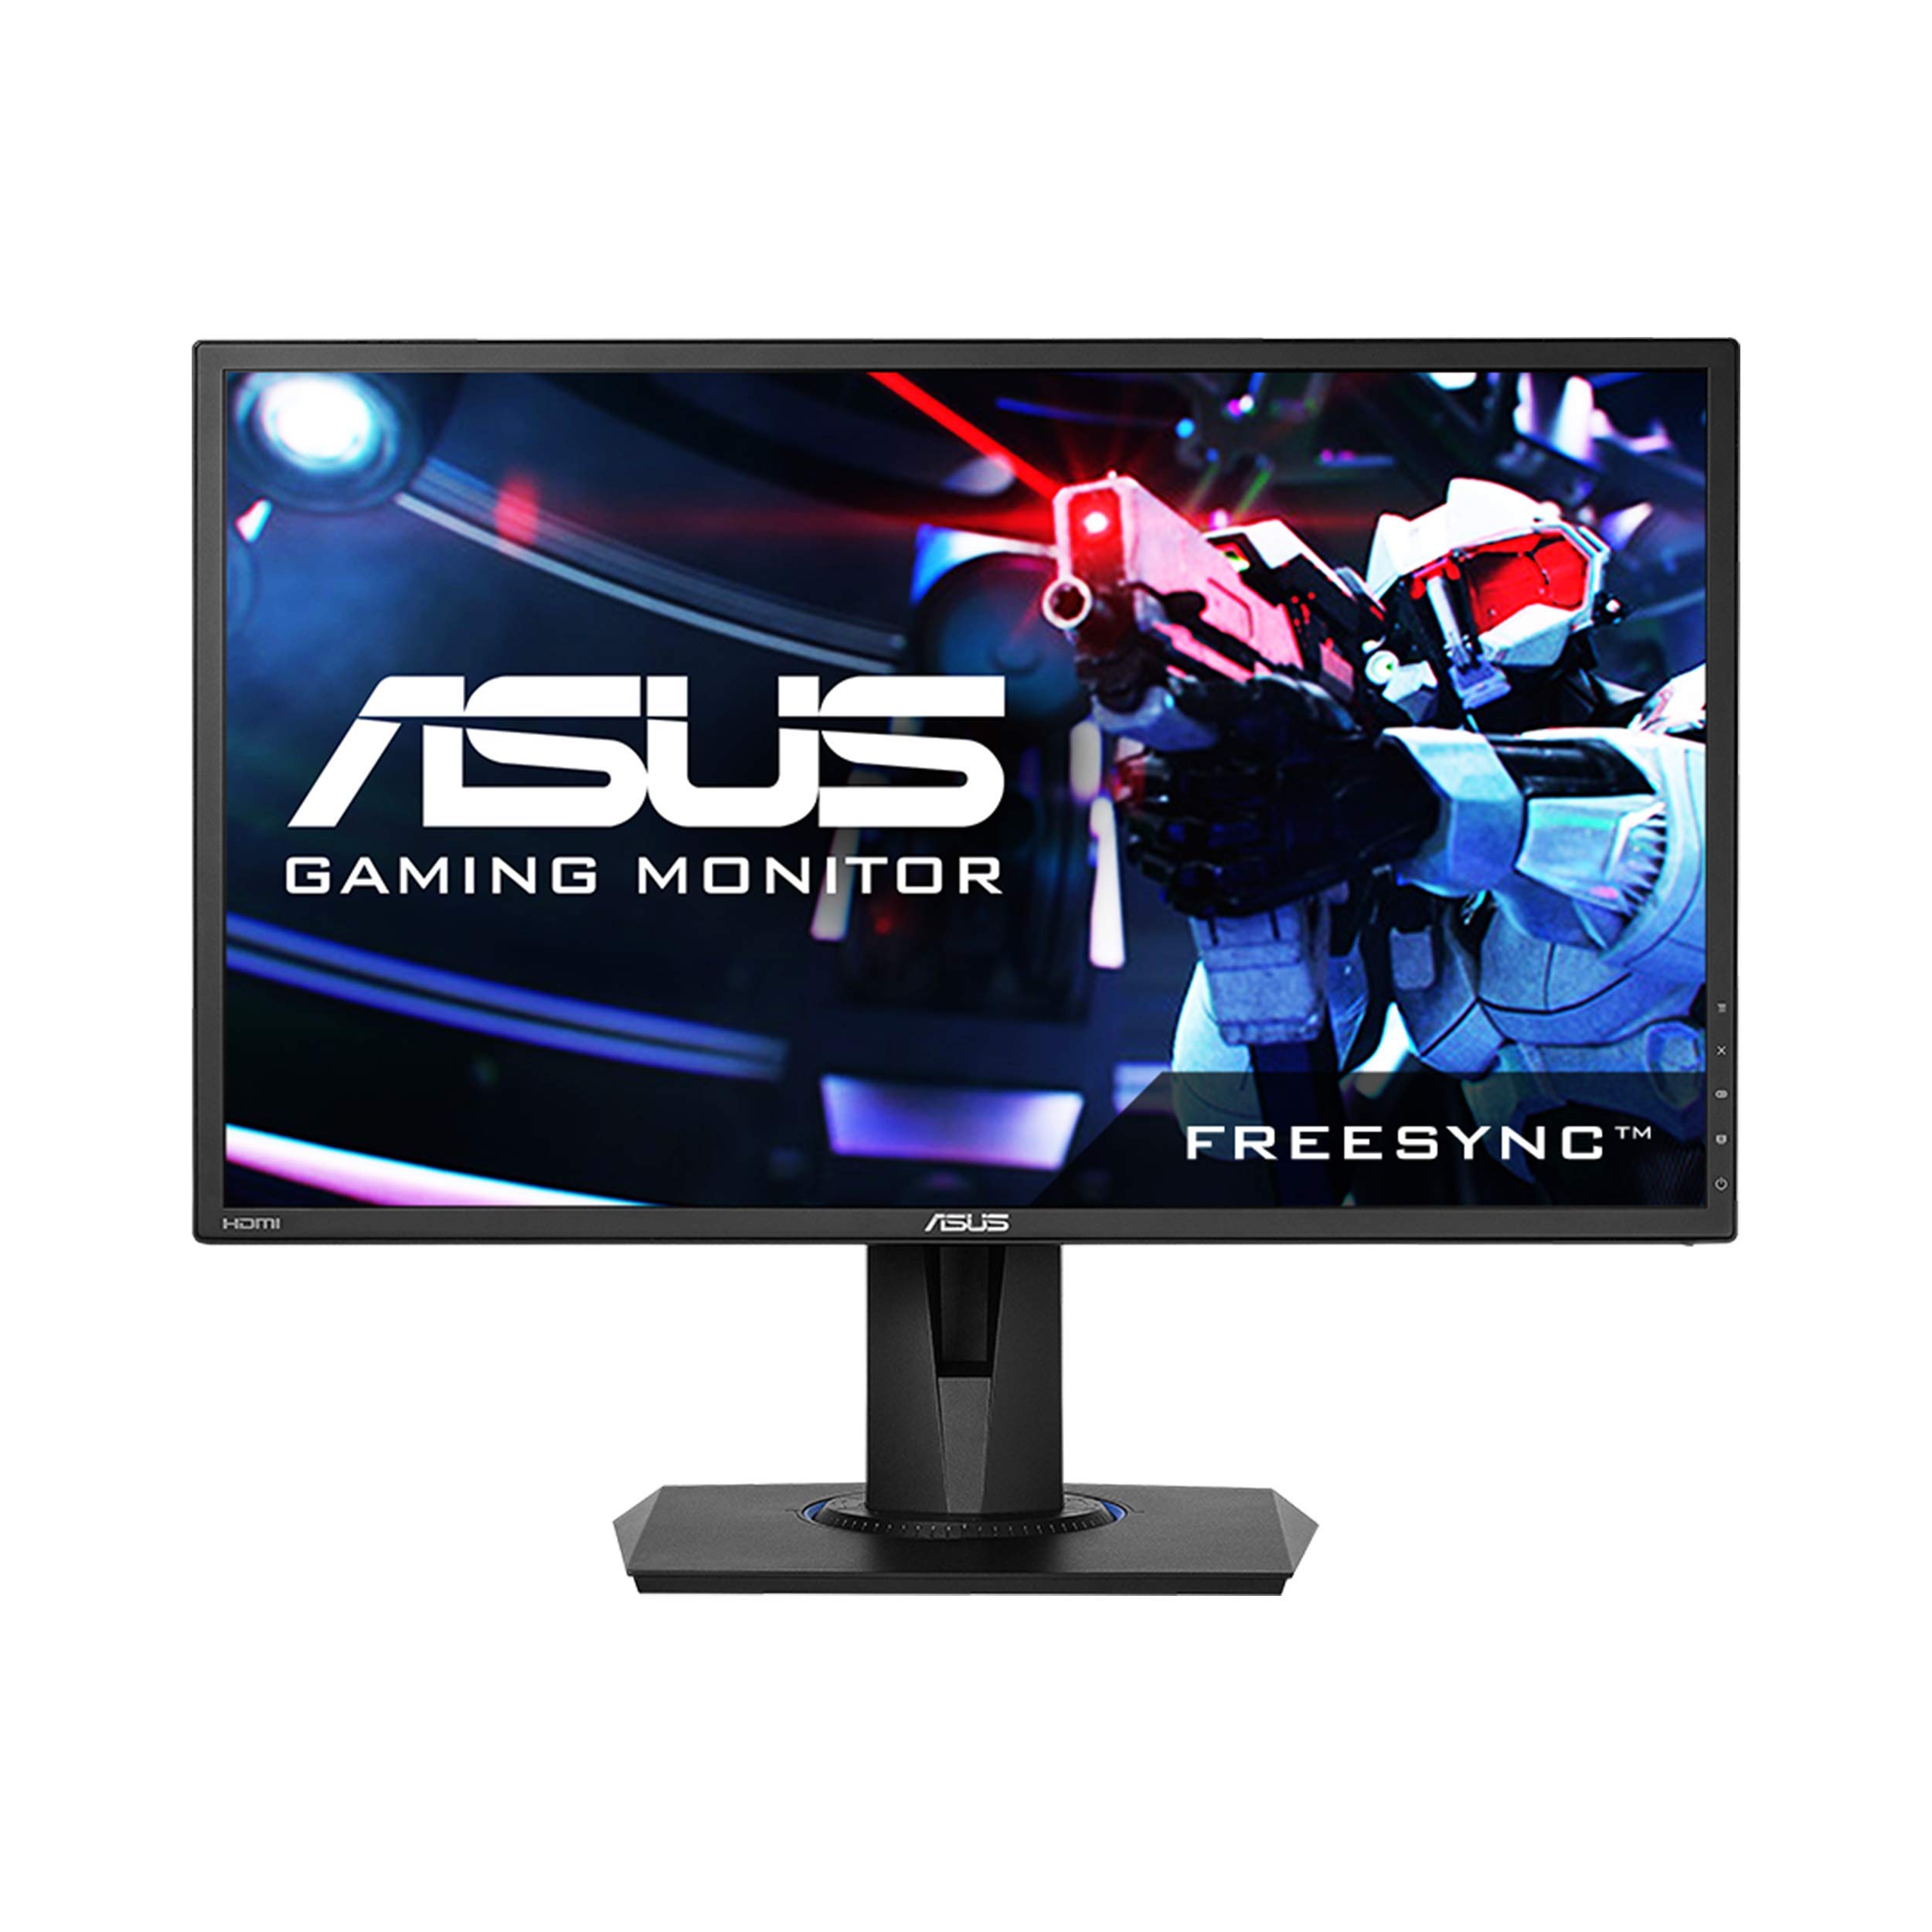 Book Cover ASUS VG245H 24 inchFull HD 1080p 1ms Dual HDMI Eye Care Console Gaming Monitor with FreeSync/Adaptive Sync, Black, 24-inch 24